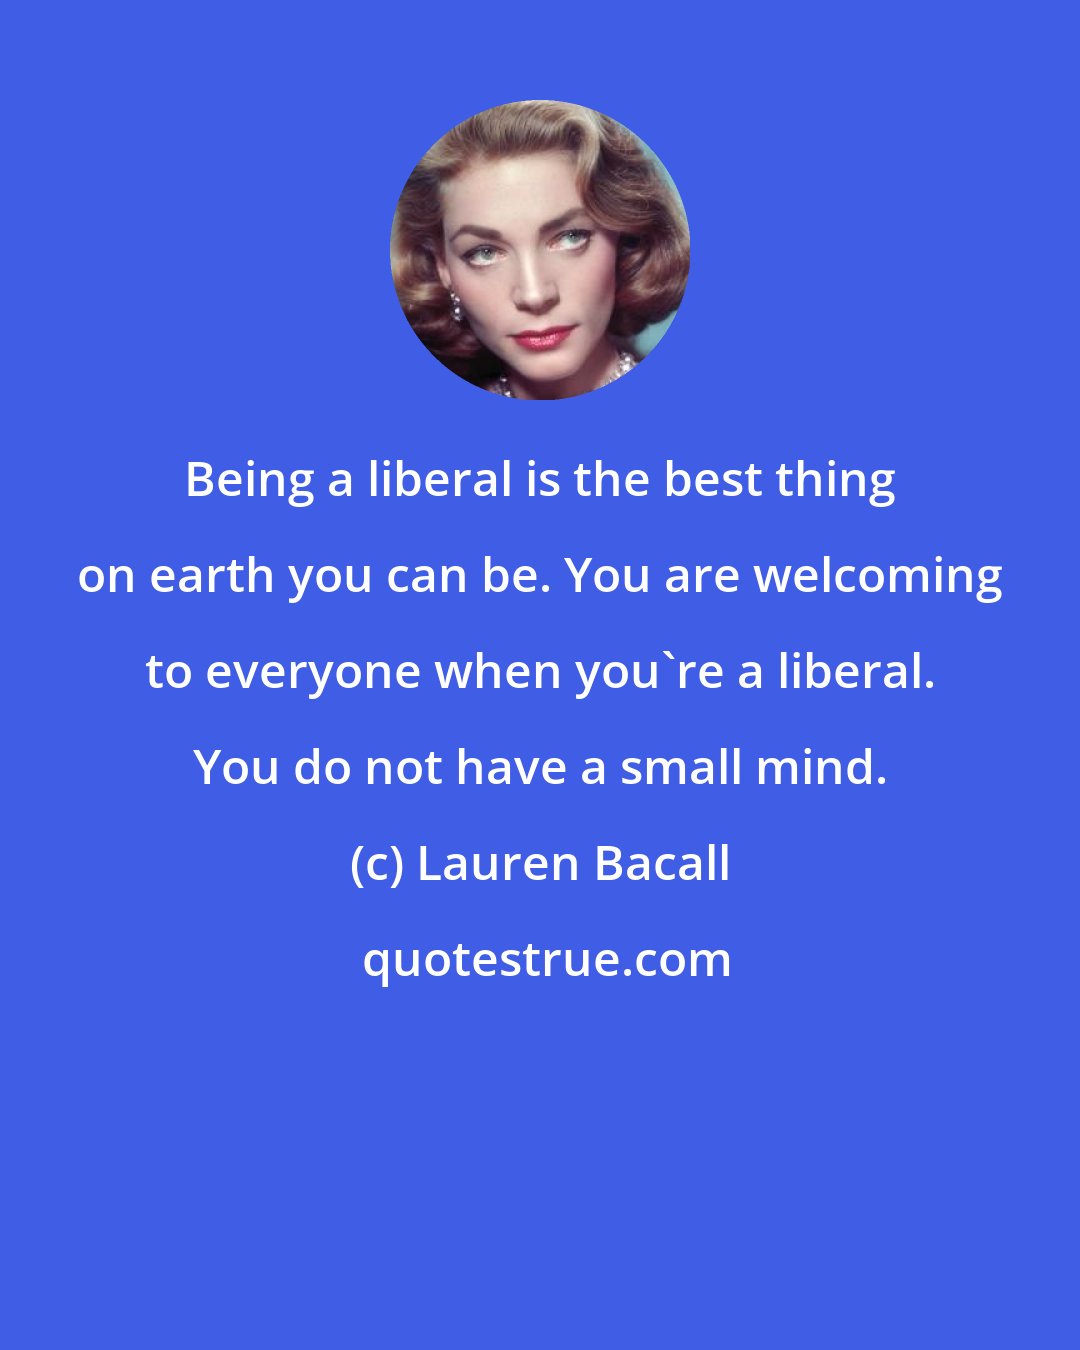 Lauren Bacall: Being a liberal is the best thing on earth you can be. You are welcoming to everyone when you're a liberal. You do not have a small mind.